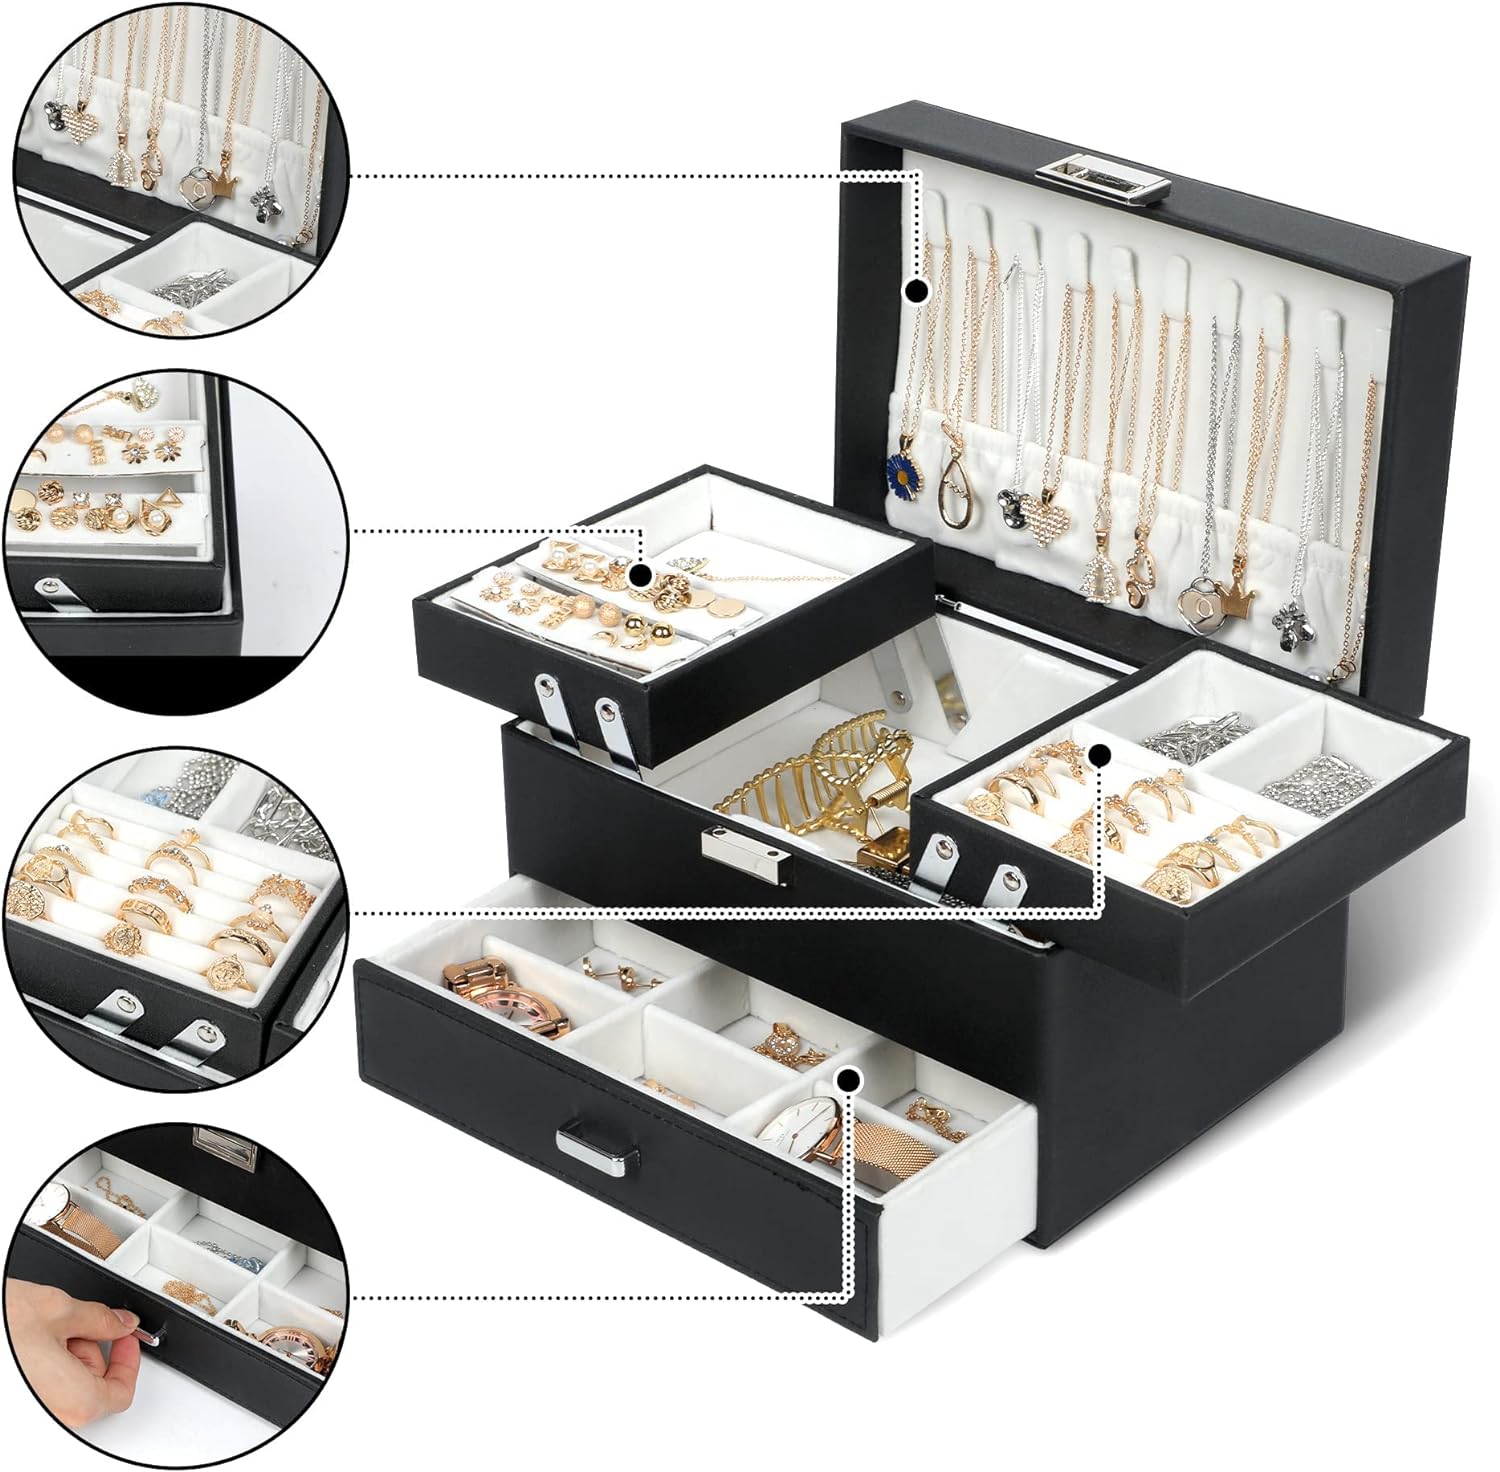 Jewelry Boxes 3 Layers Jewelry Storage Organizer for Earring, Ring, Necklace, Bracelets (Black)